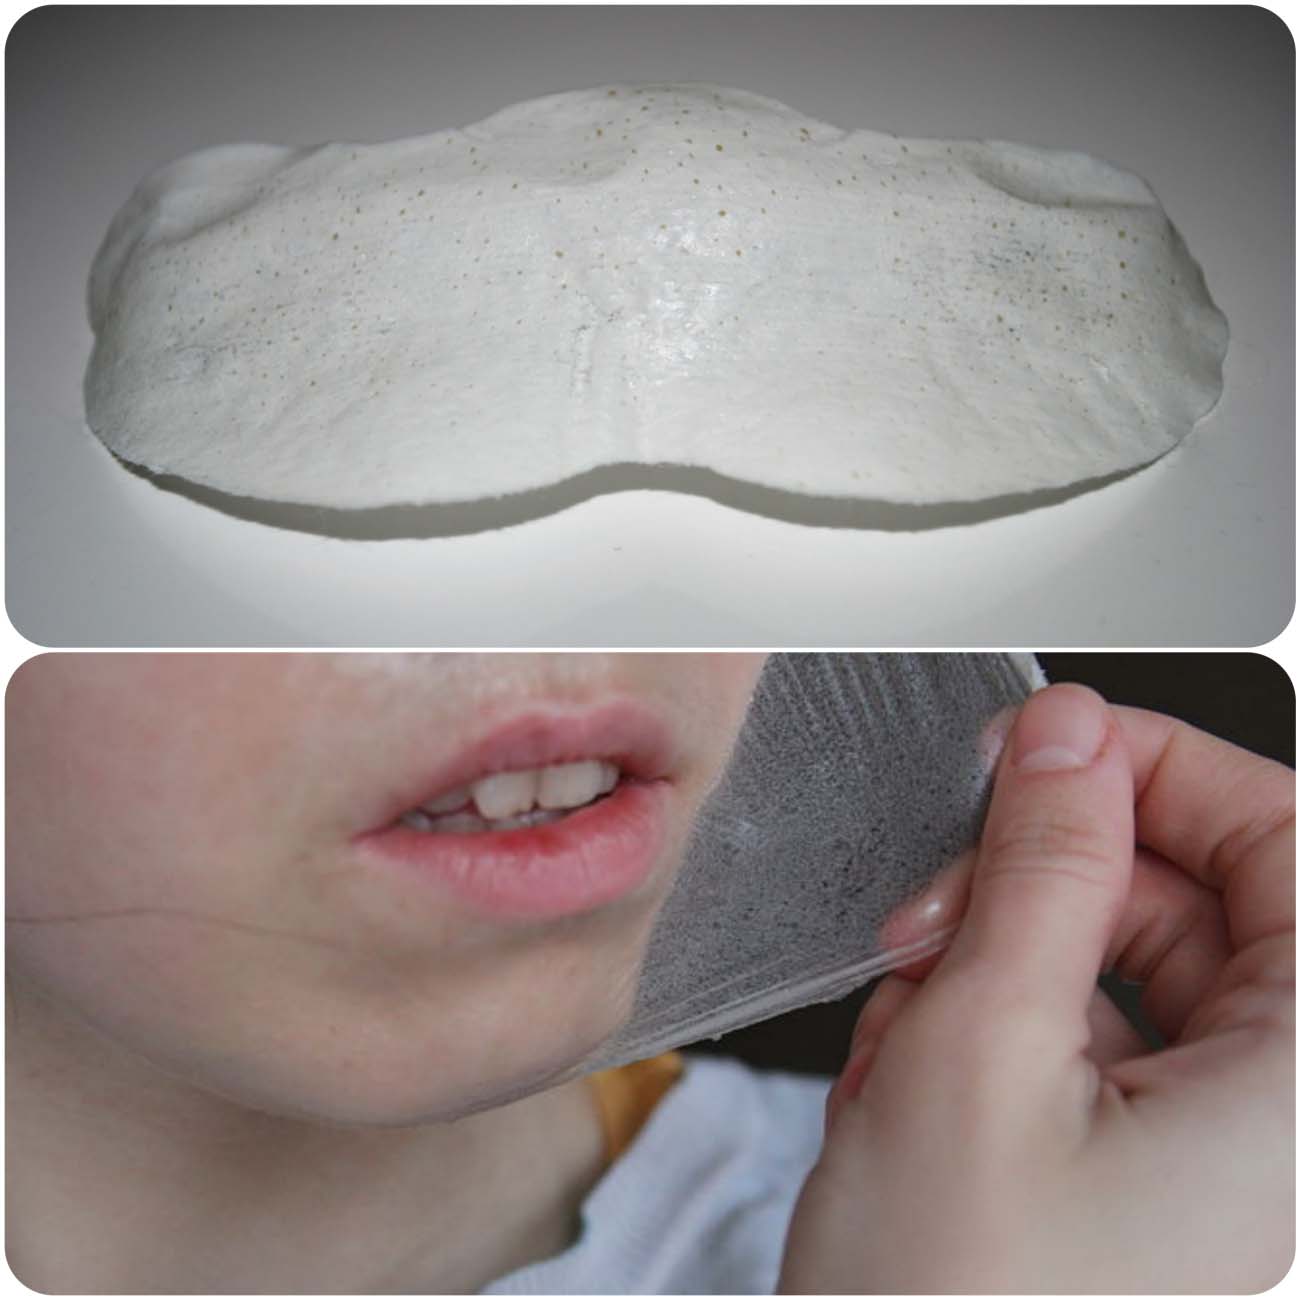 tips to use pore strips for removal of ores